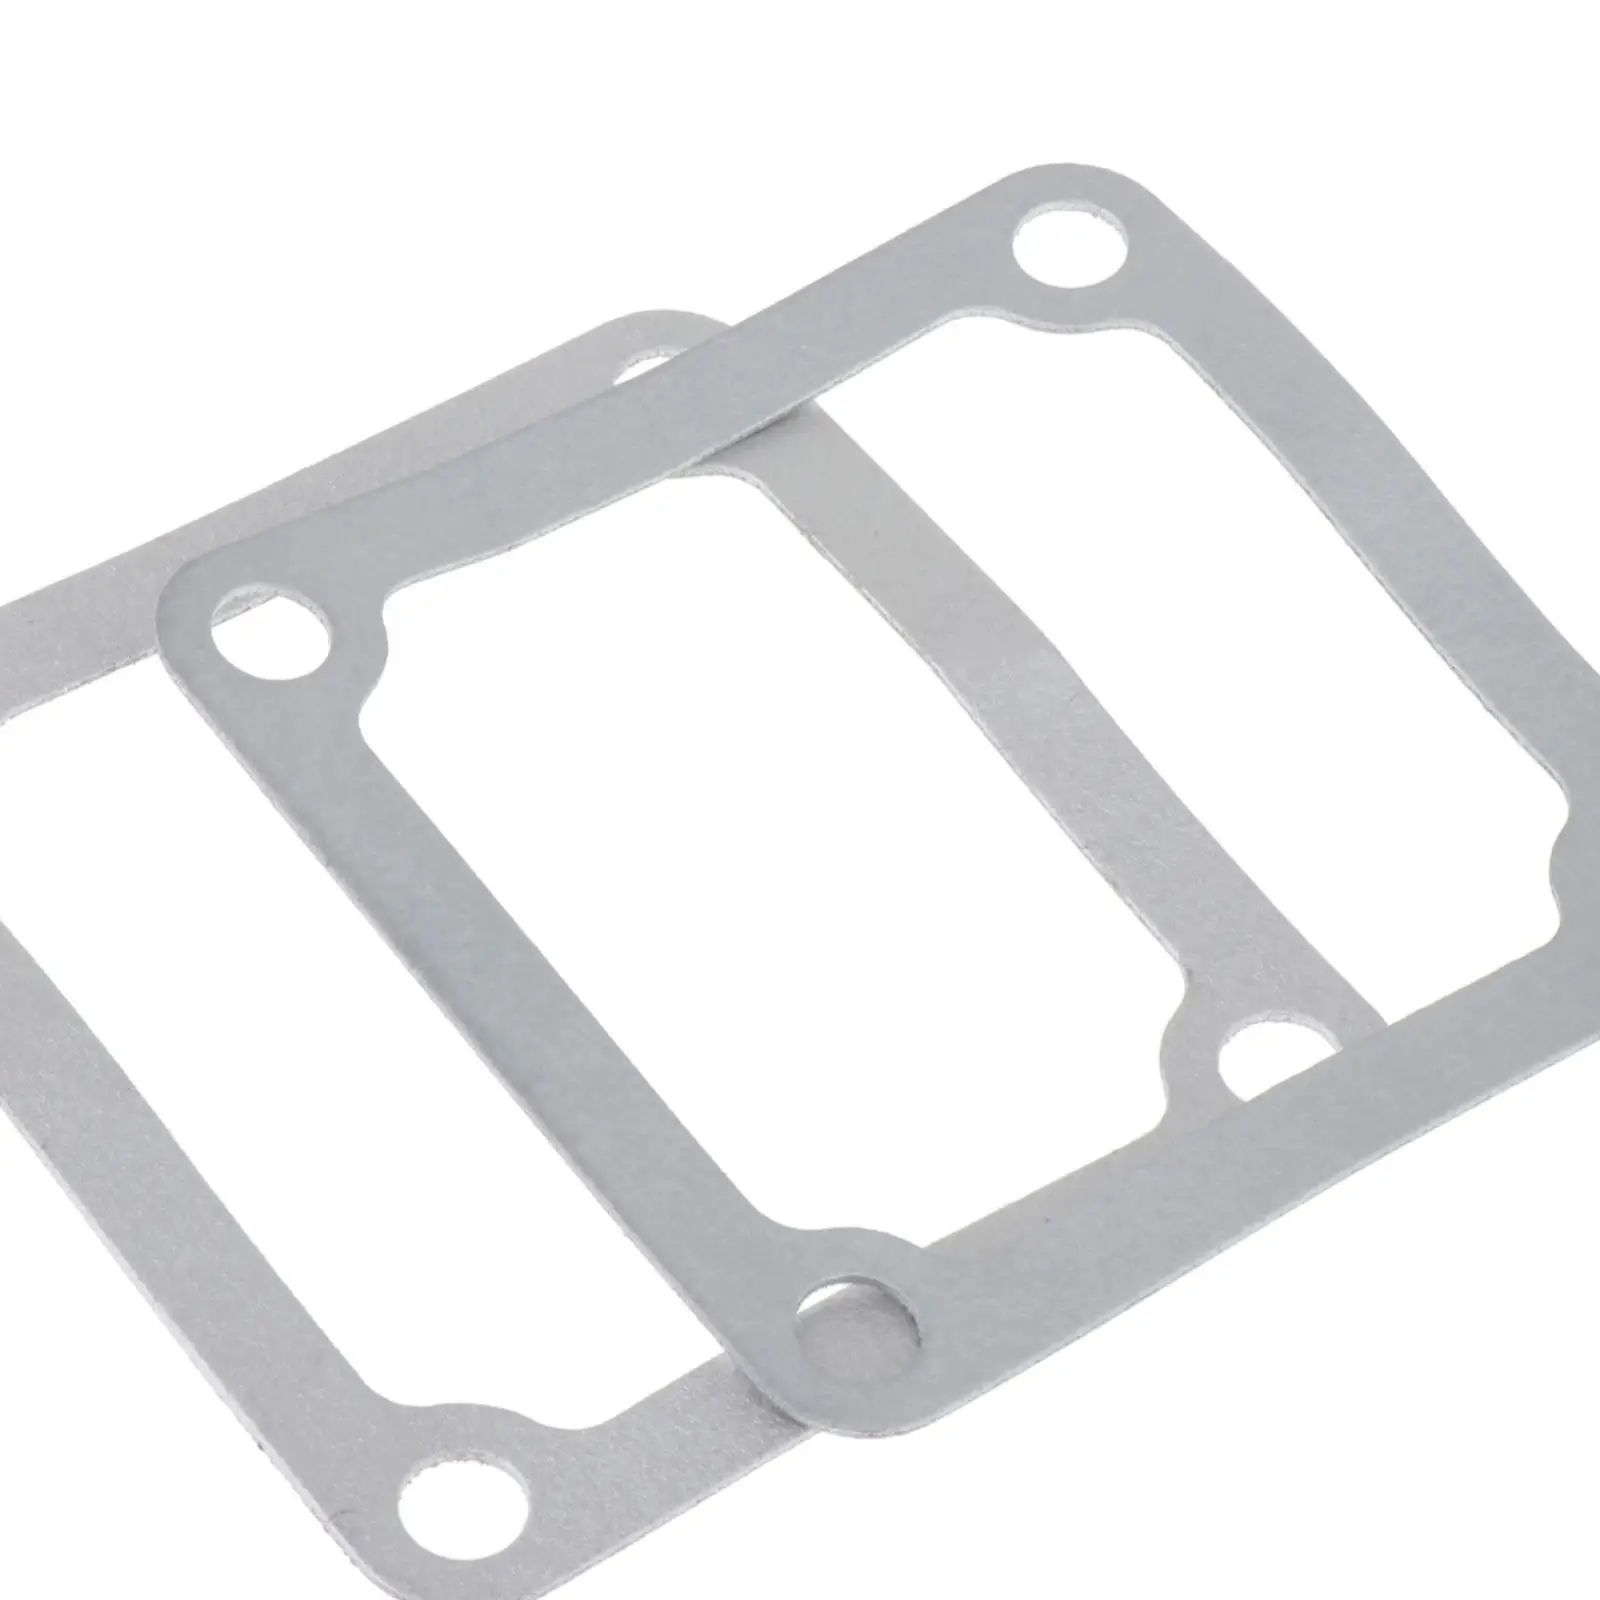 2 Pieces Intake Heater Grid Gaskets Durable 5.9L Replaces Automobile Strong Sealing 12V, 24V 89-07 Professional Auto Parts Paper